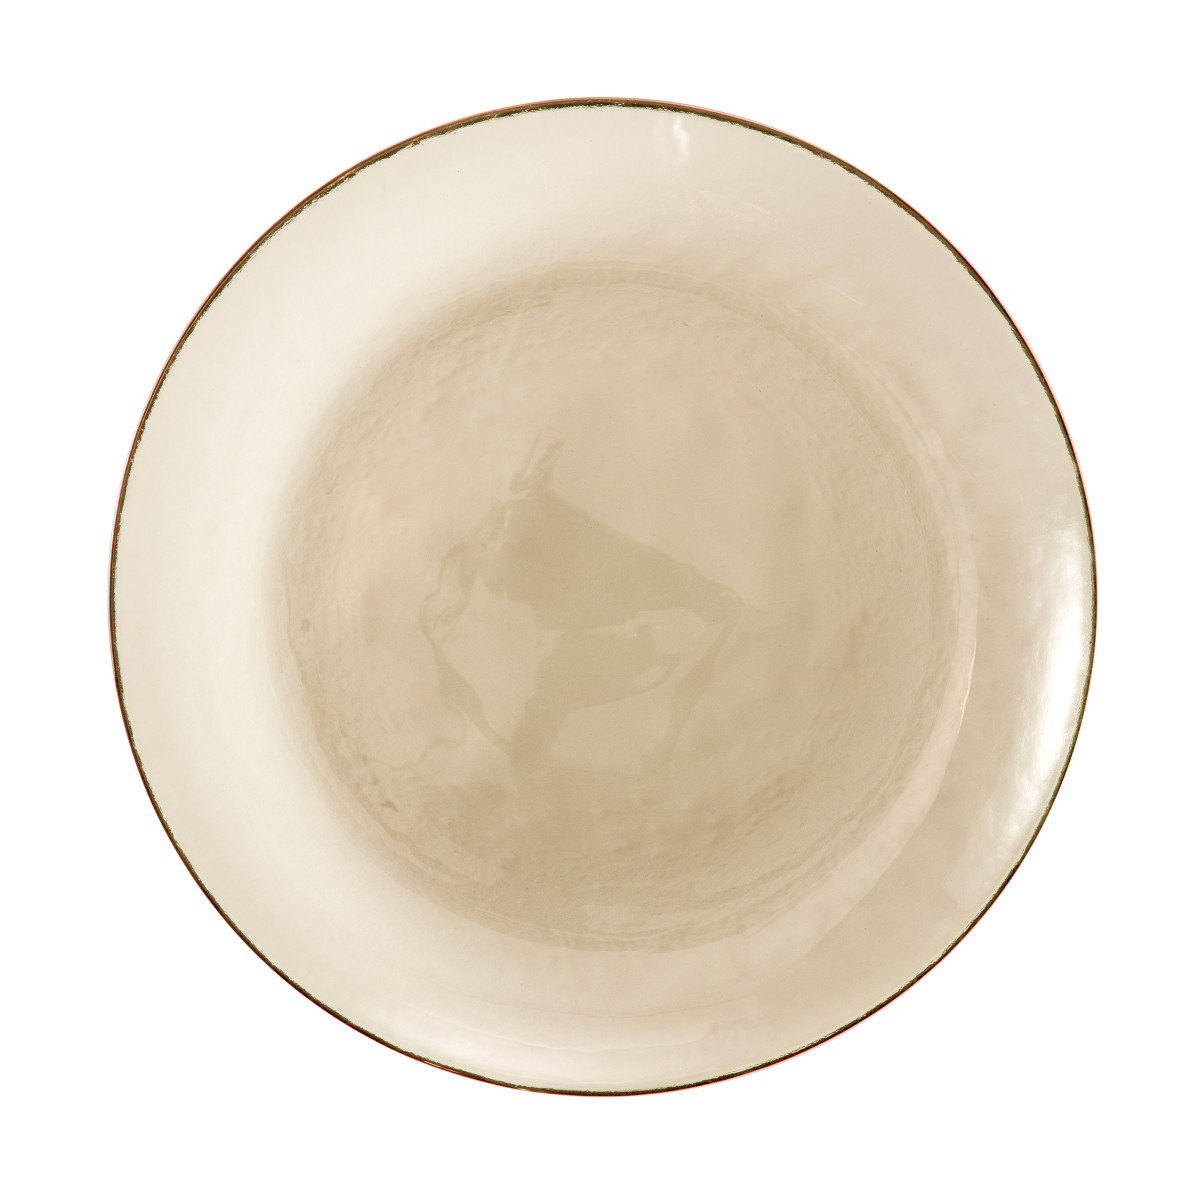 Los Cabos Ginger Dinner Plate 10.5"